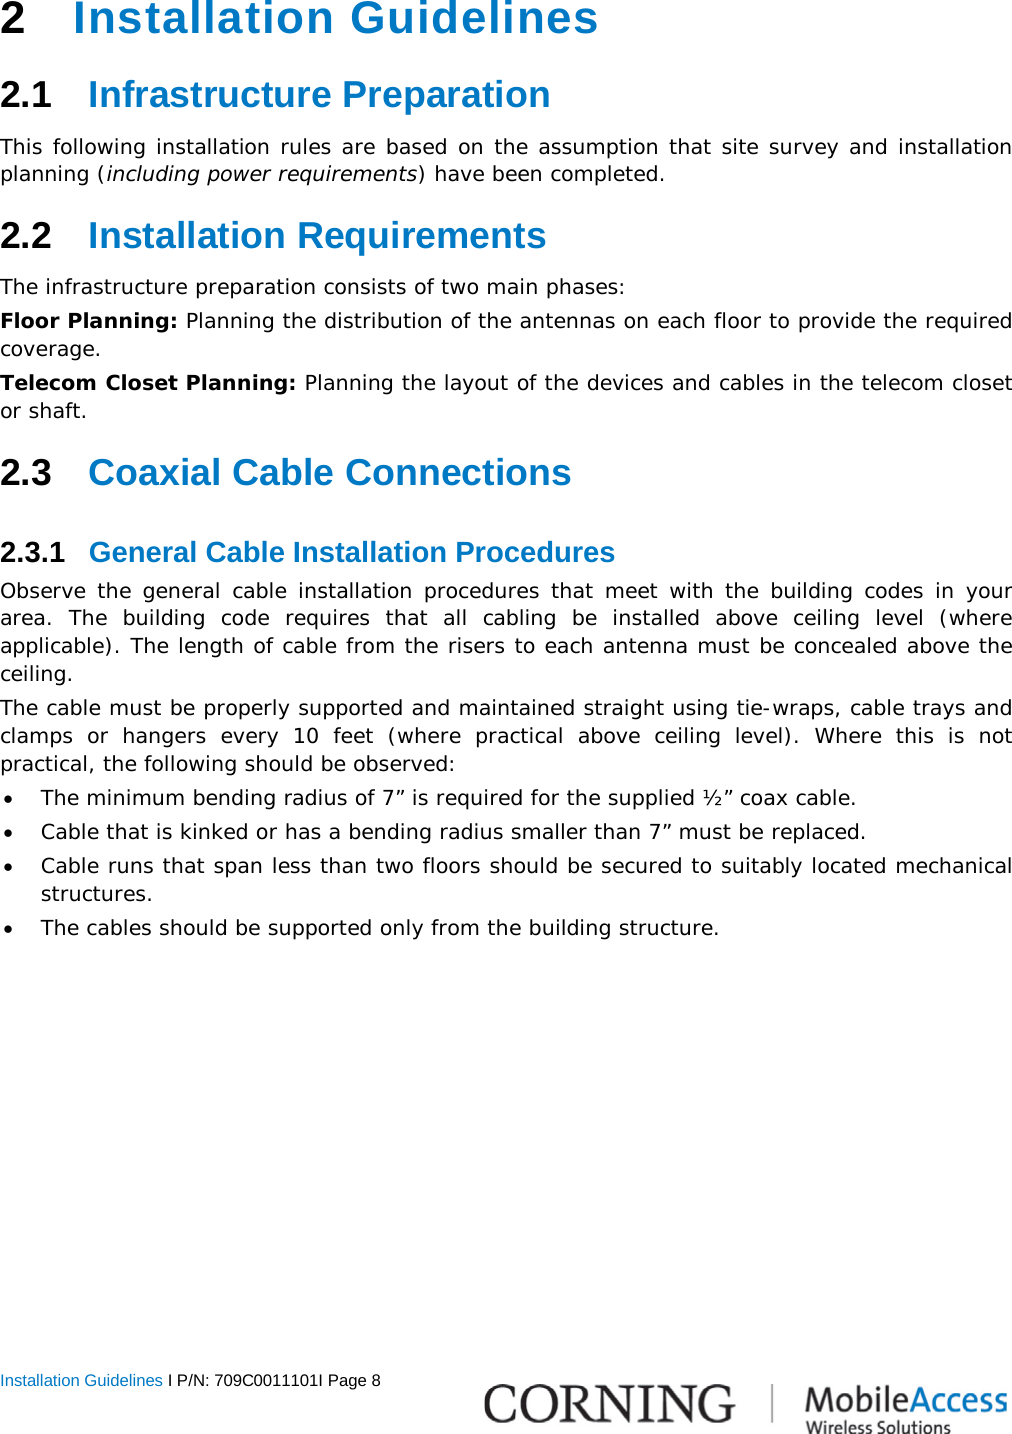  Installation Guidelines I P/N: 709C0011101I Page 8   2  Installation Guidelines 2.1  Infrastructure Preparation This following installation rules are based on the assumption that site survey and installation planning (including power requirements) have been completed.  2.2  Installation Requirements The infrastructure preparation consists of two main phases: Floor Planning: Planning the distribution of the antennas on each floor to provide the required coverage.  Telecom Closet Planning: Planning the layout of the devices and cables in the telecom closet or shaft.  2.3  Coaxial Cable Connections 2.3.1  General Cable Installation Procedures Observe the general cable installation procedures that meet with the building codes in your area. The building code requires that all cabling be installed above ceiling level (where applicable). The length of cable from the risers to each antenna must be concealed above the ceiling.  The cable must be properly supported and maintained straight using tie-wraps, cable trays and clamps or hangers every 10 feet (where practical above ceiling level). Where this is not practical, the following should be observed: • The minimum bending radius of 7” is required for the supplied ½” coax cable. • Cable that is kinked or has a bending radius smaller than 7” must be replaced. • Cable runs that span less than two floors should be secured to suitably located mechanical structures. • The cables should be supported only from the building structure. 